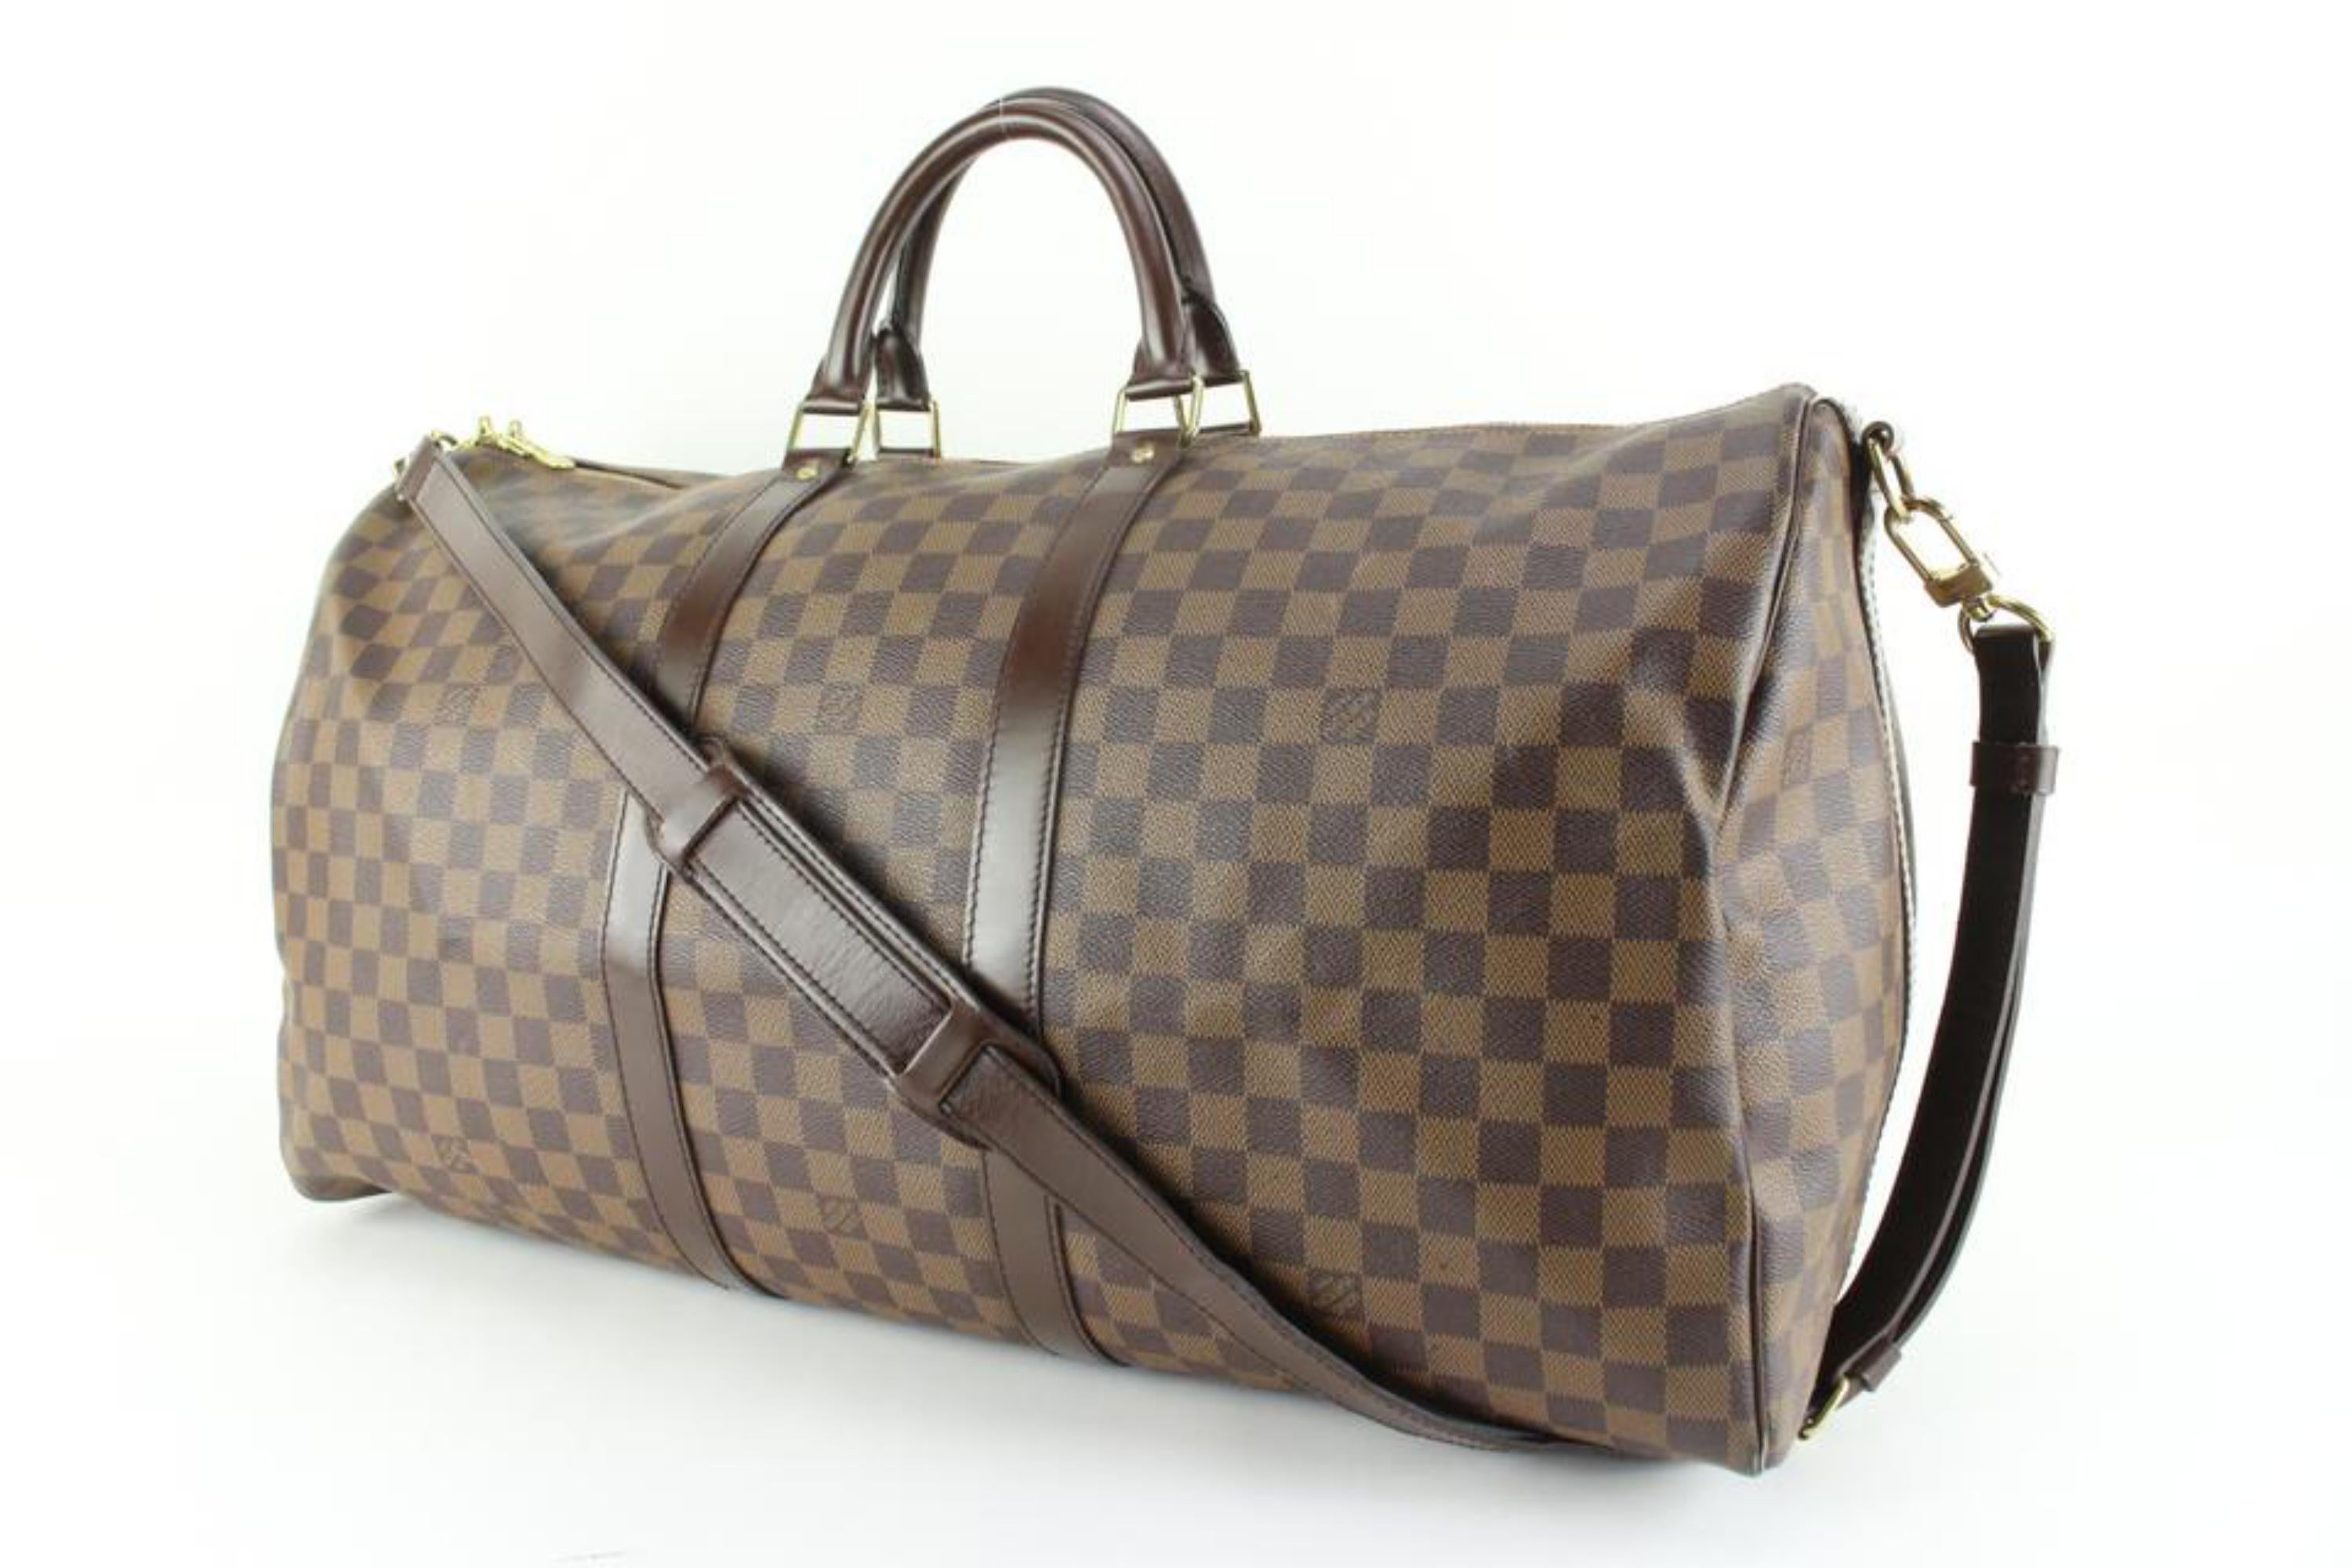 Gray Louis Vuitton Damier Ebene Keepall Bandouliere 55 Duffle Bag with Strap 99lk729s For Sale